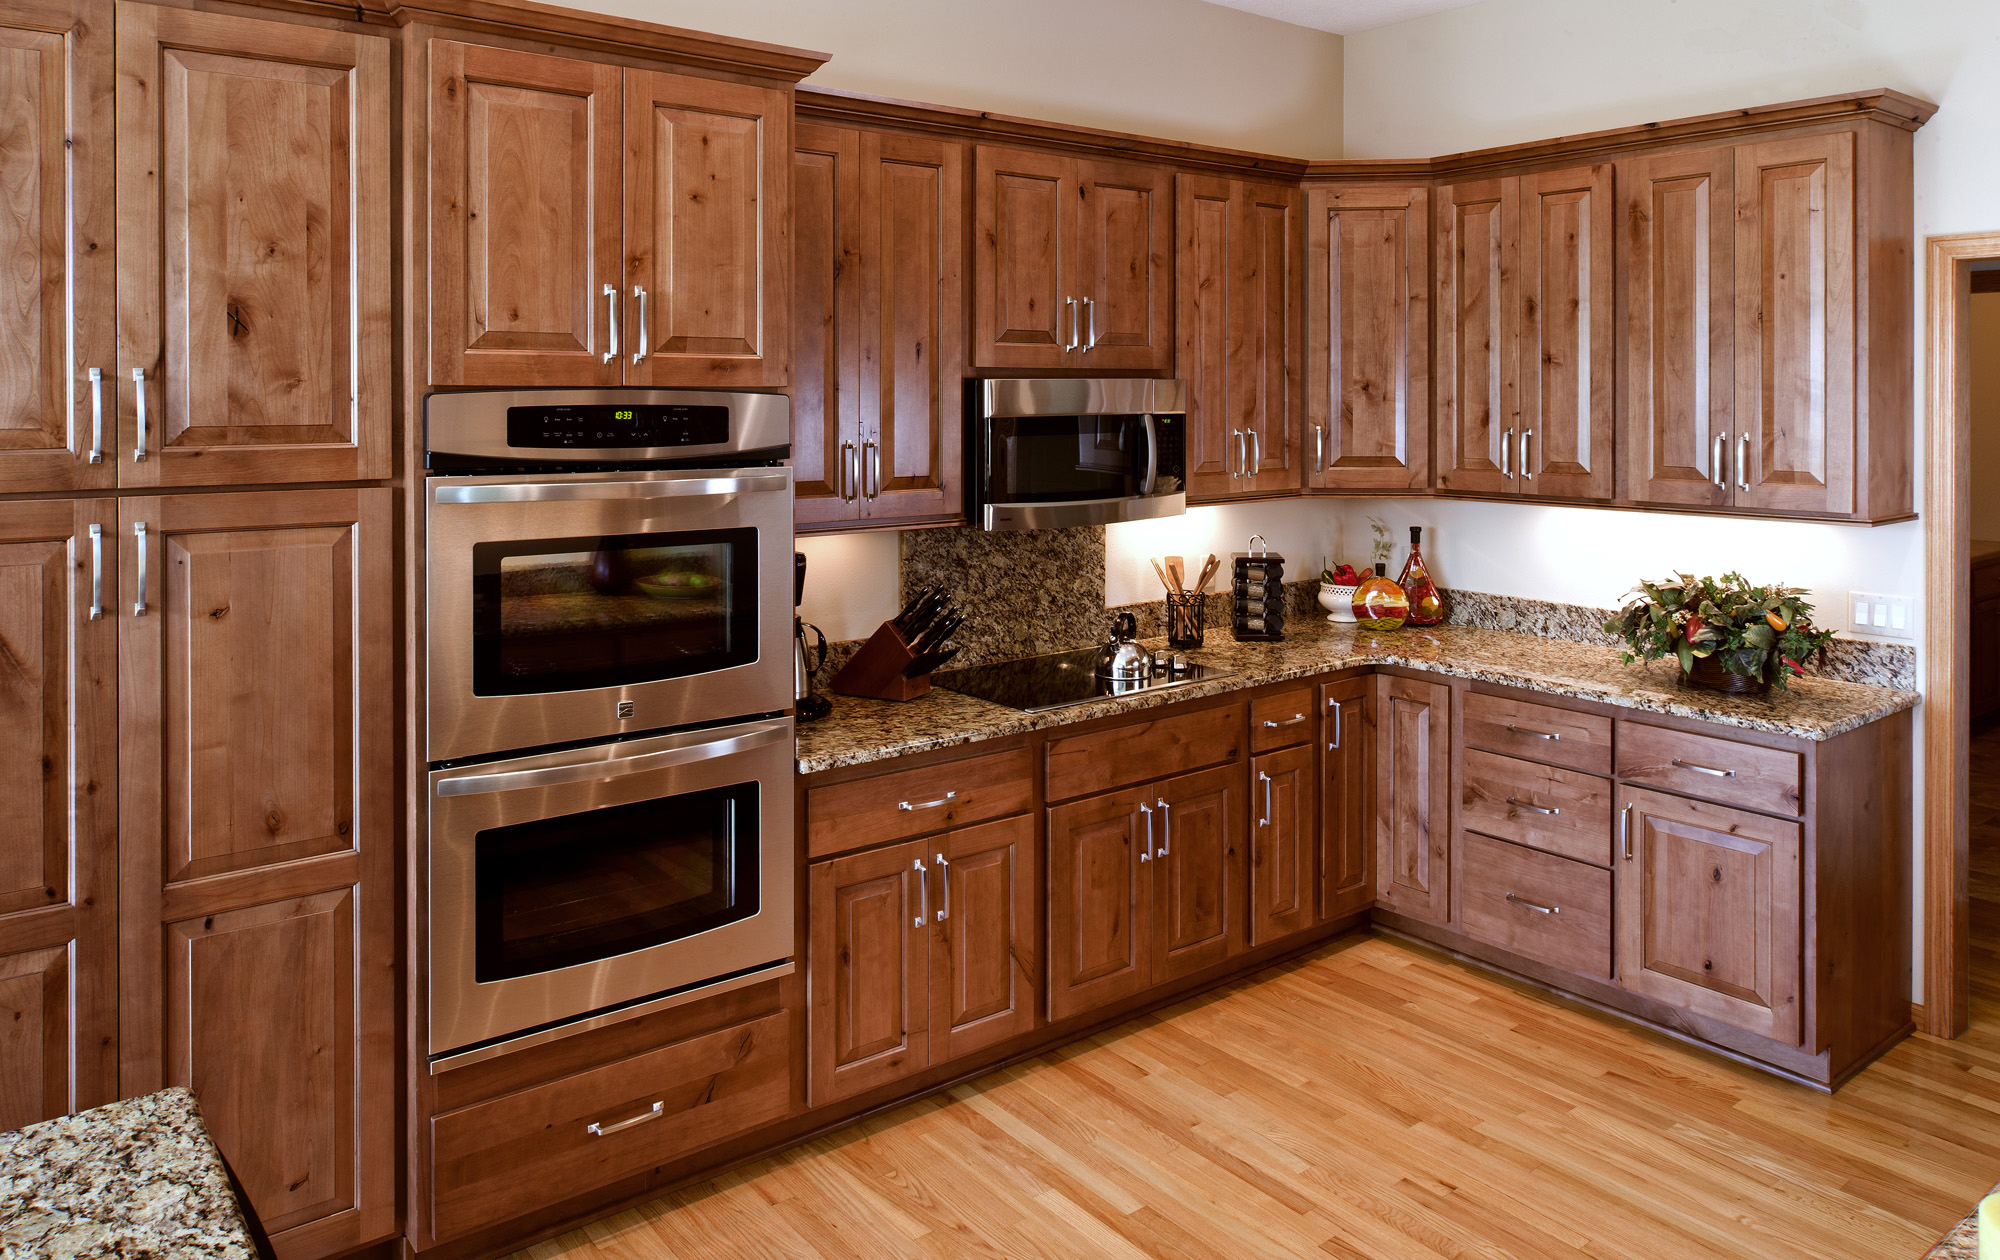 See this comfortable refaced kitchen | Showplace Cabinetry